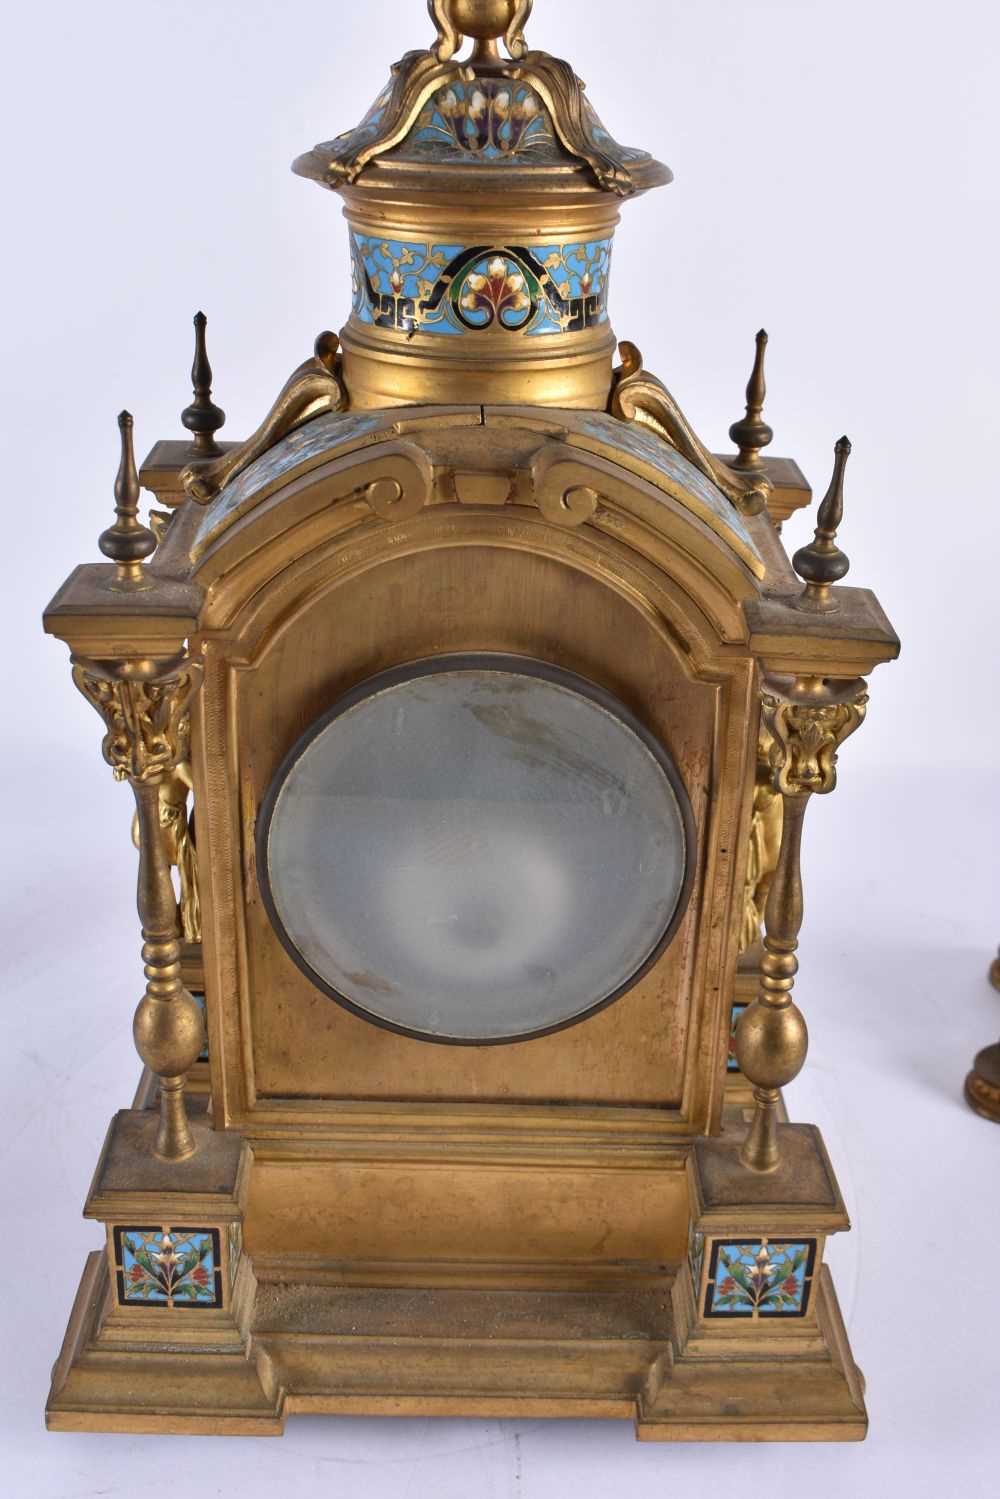 A FINE 19TH CENTURY FRENCH ORMOLU AND CHAMPLEVE ENAMEL CLOCK GARNITURE formed with putti amongst - Image 8 of 9